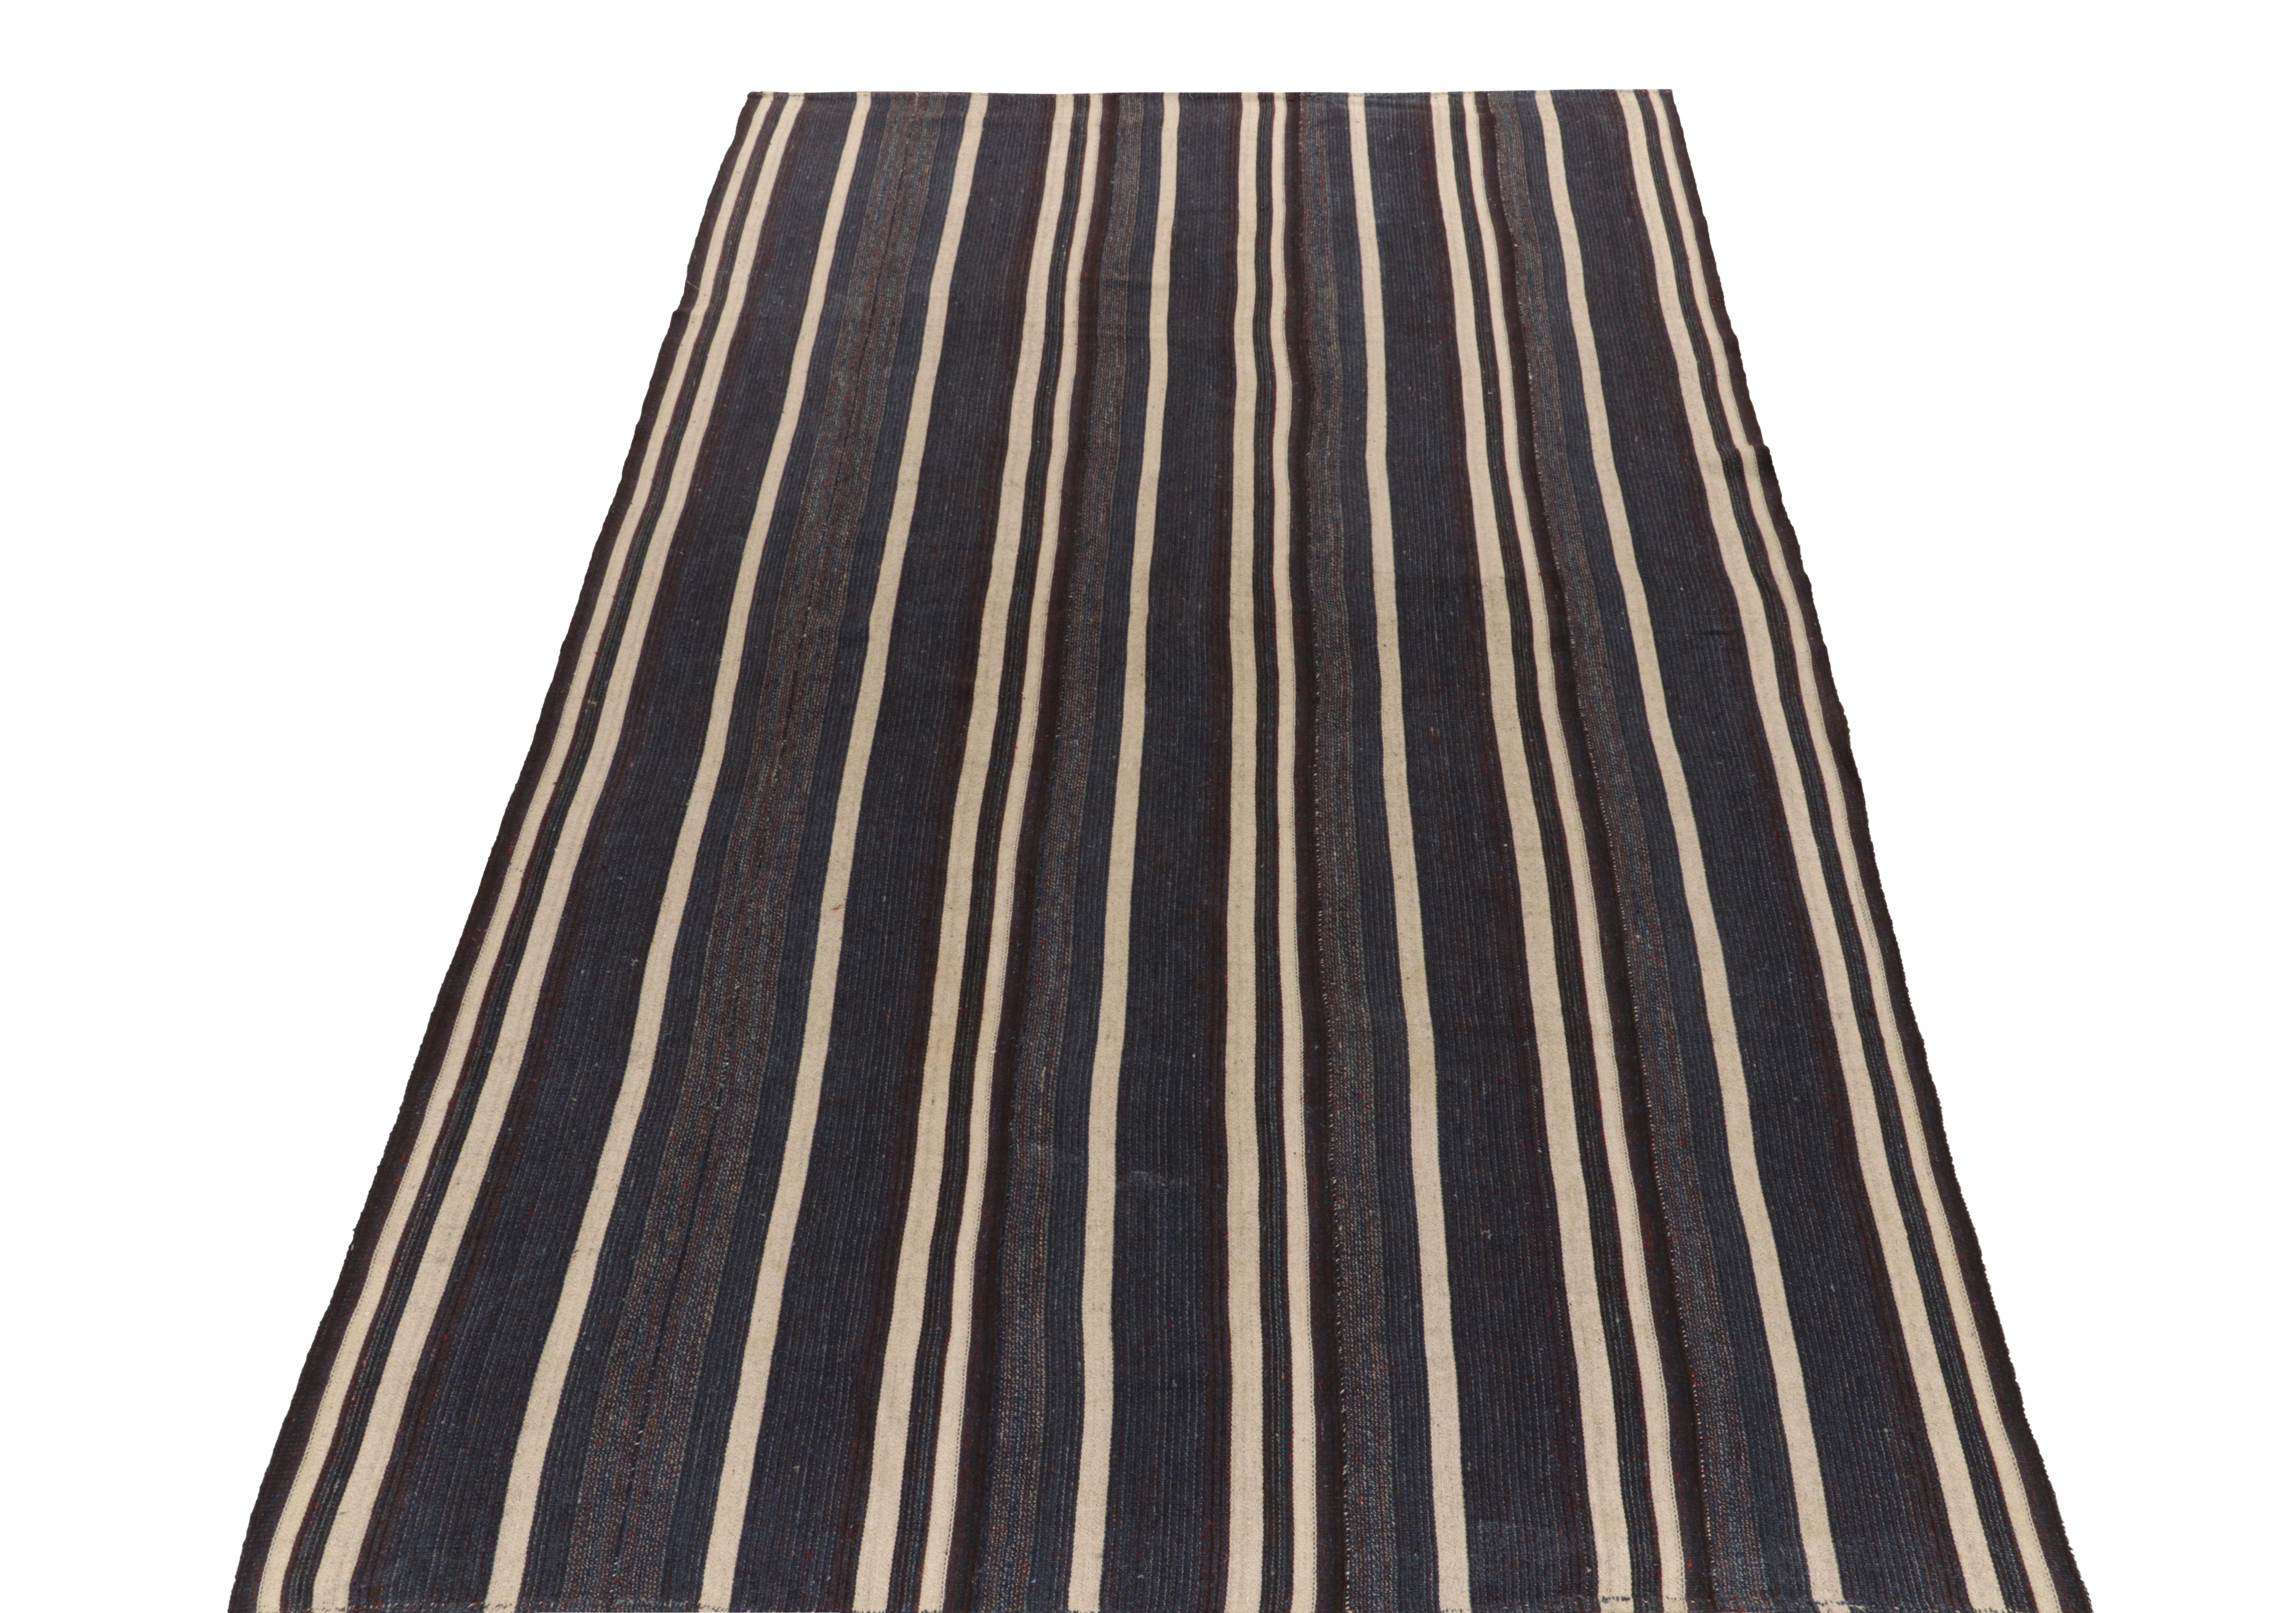 Handwoven in panel style, a 7x12 vintage Turkish kilim rug from our flatweave selections. The unique weave casts an elegant impression with striations in a rare blue and off-white colorplay accenting to subtle purples & complementary tones hinting